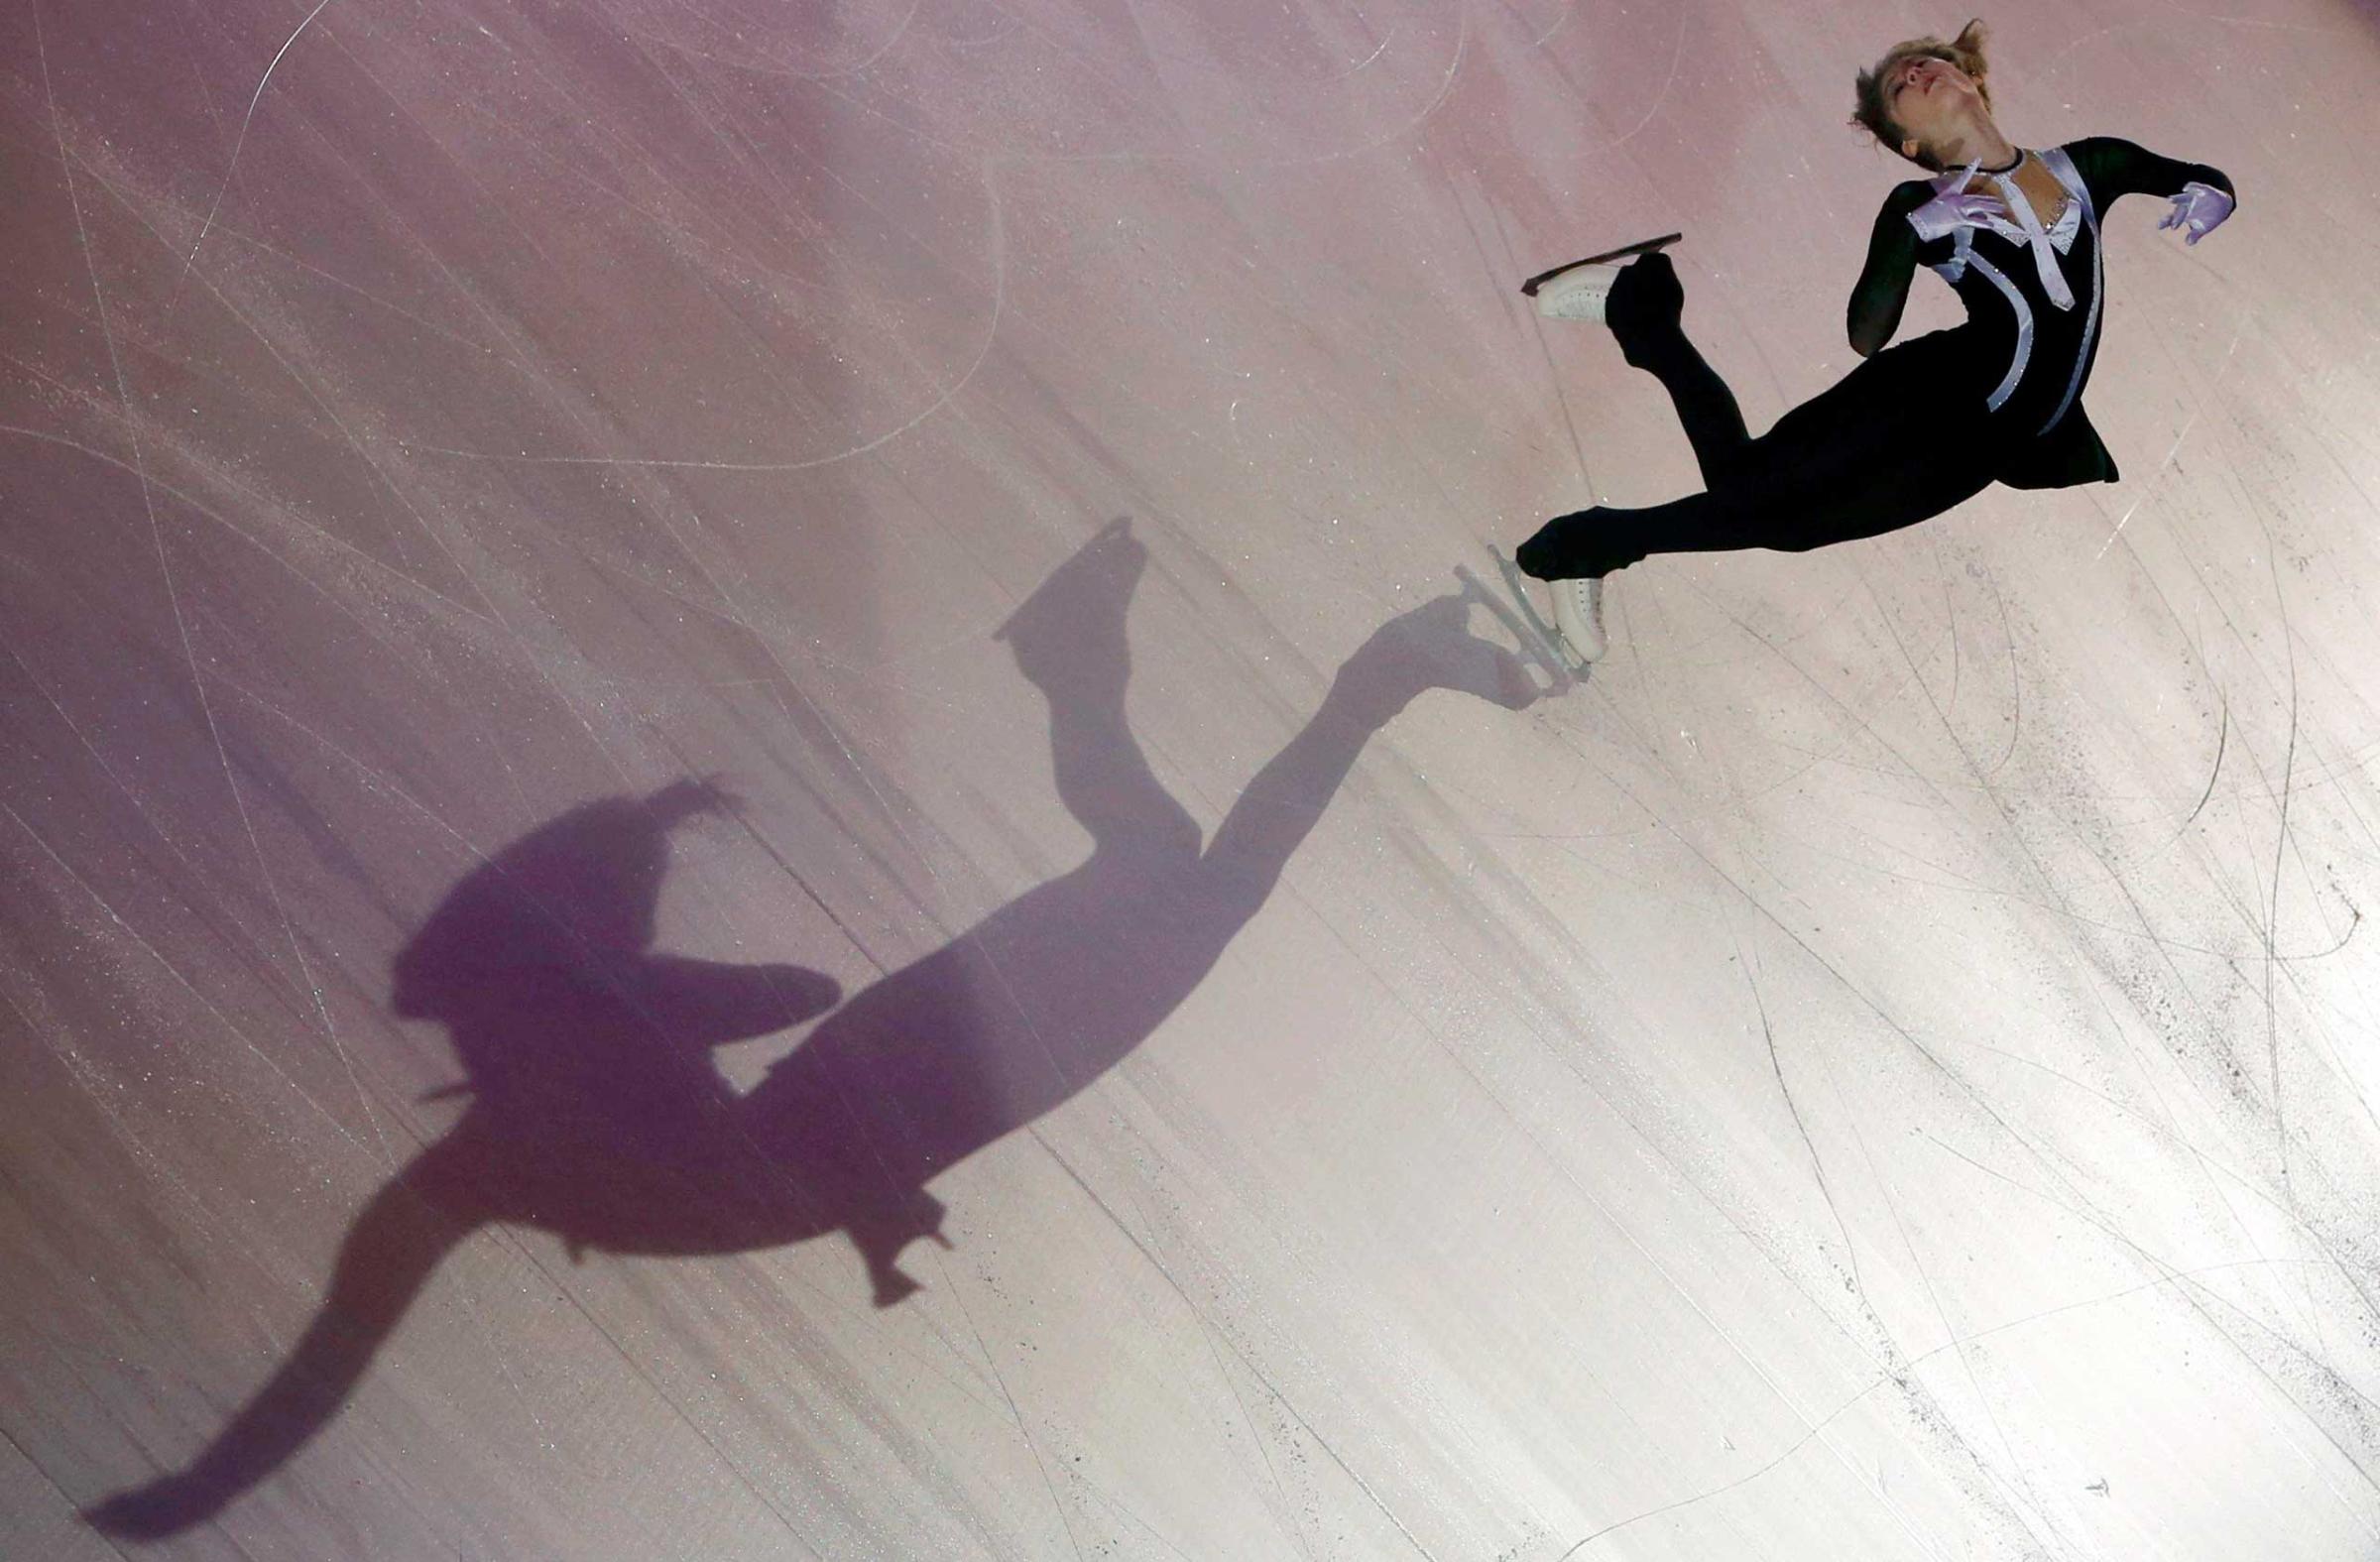 A shadow is cast on the ice as Julia Lipnitskaia of Russia performs during the gala exhibition at the ISU Bompard Trophy Figure Skating event in Bordeaux